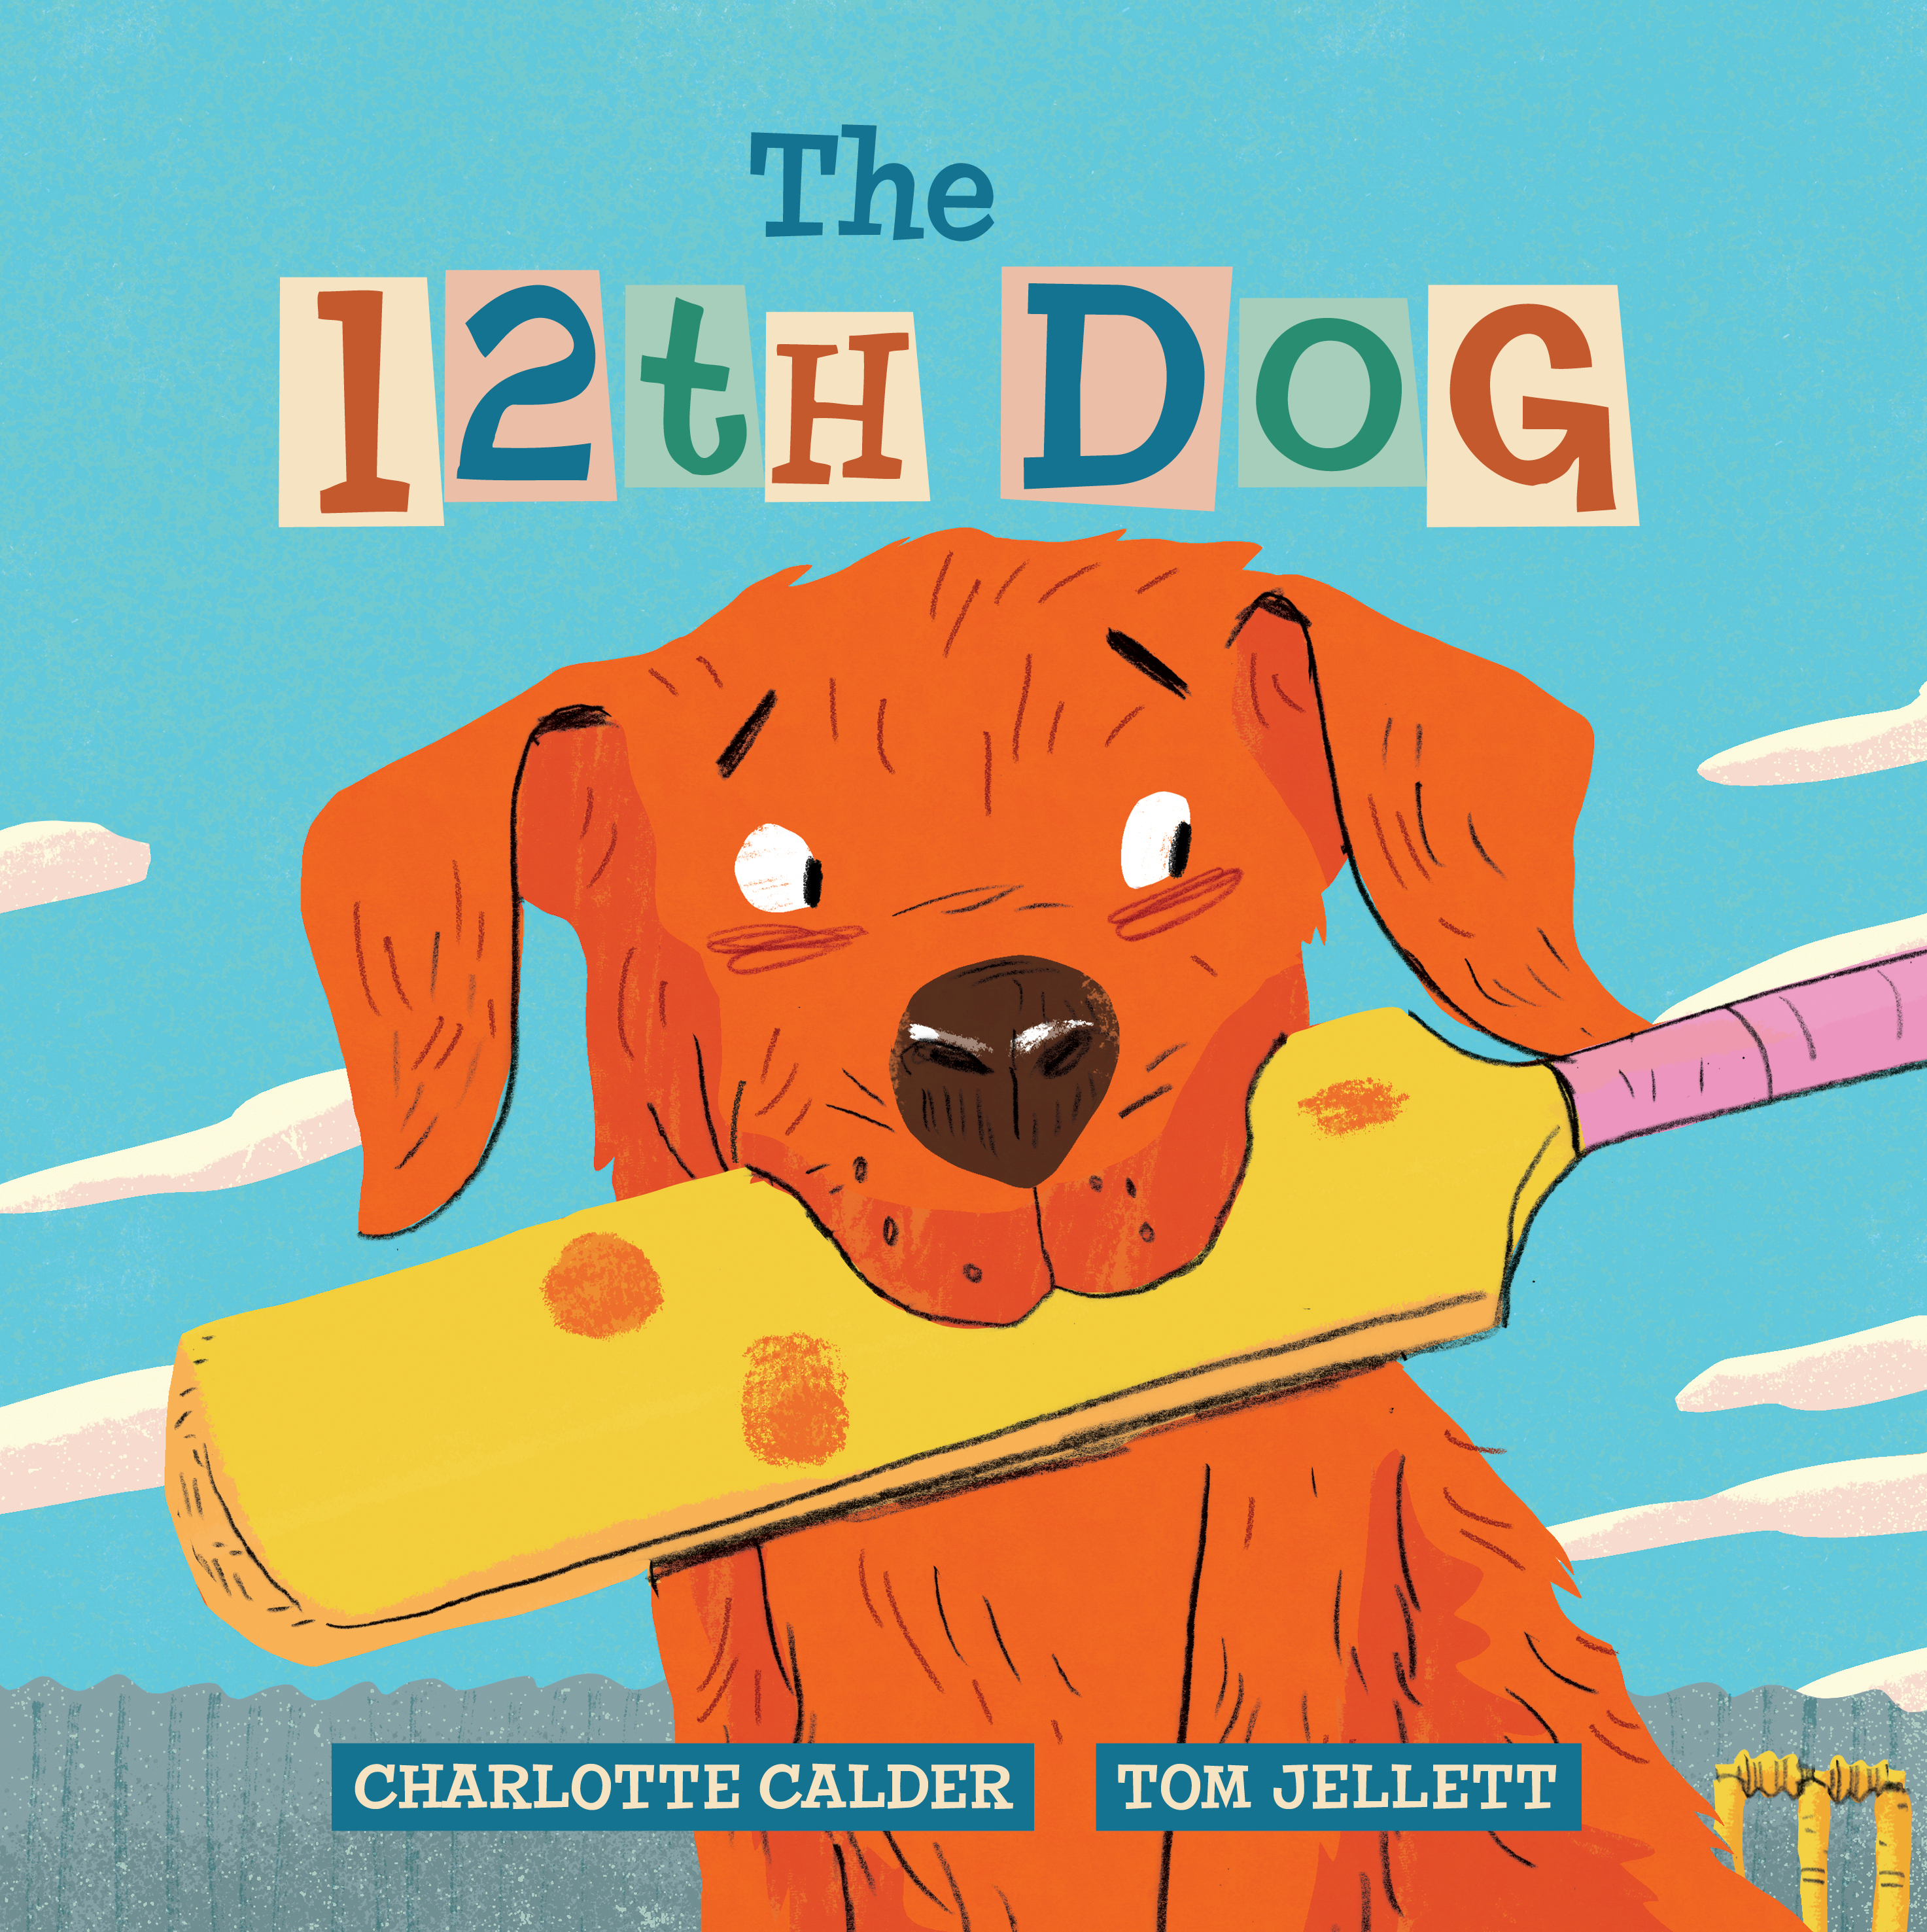 The 12th Dog by Charlotte Calder